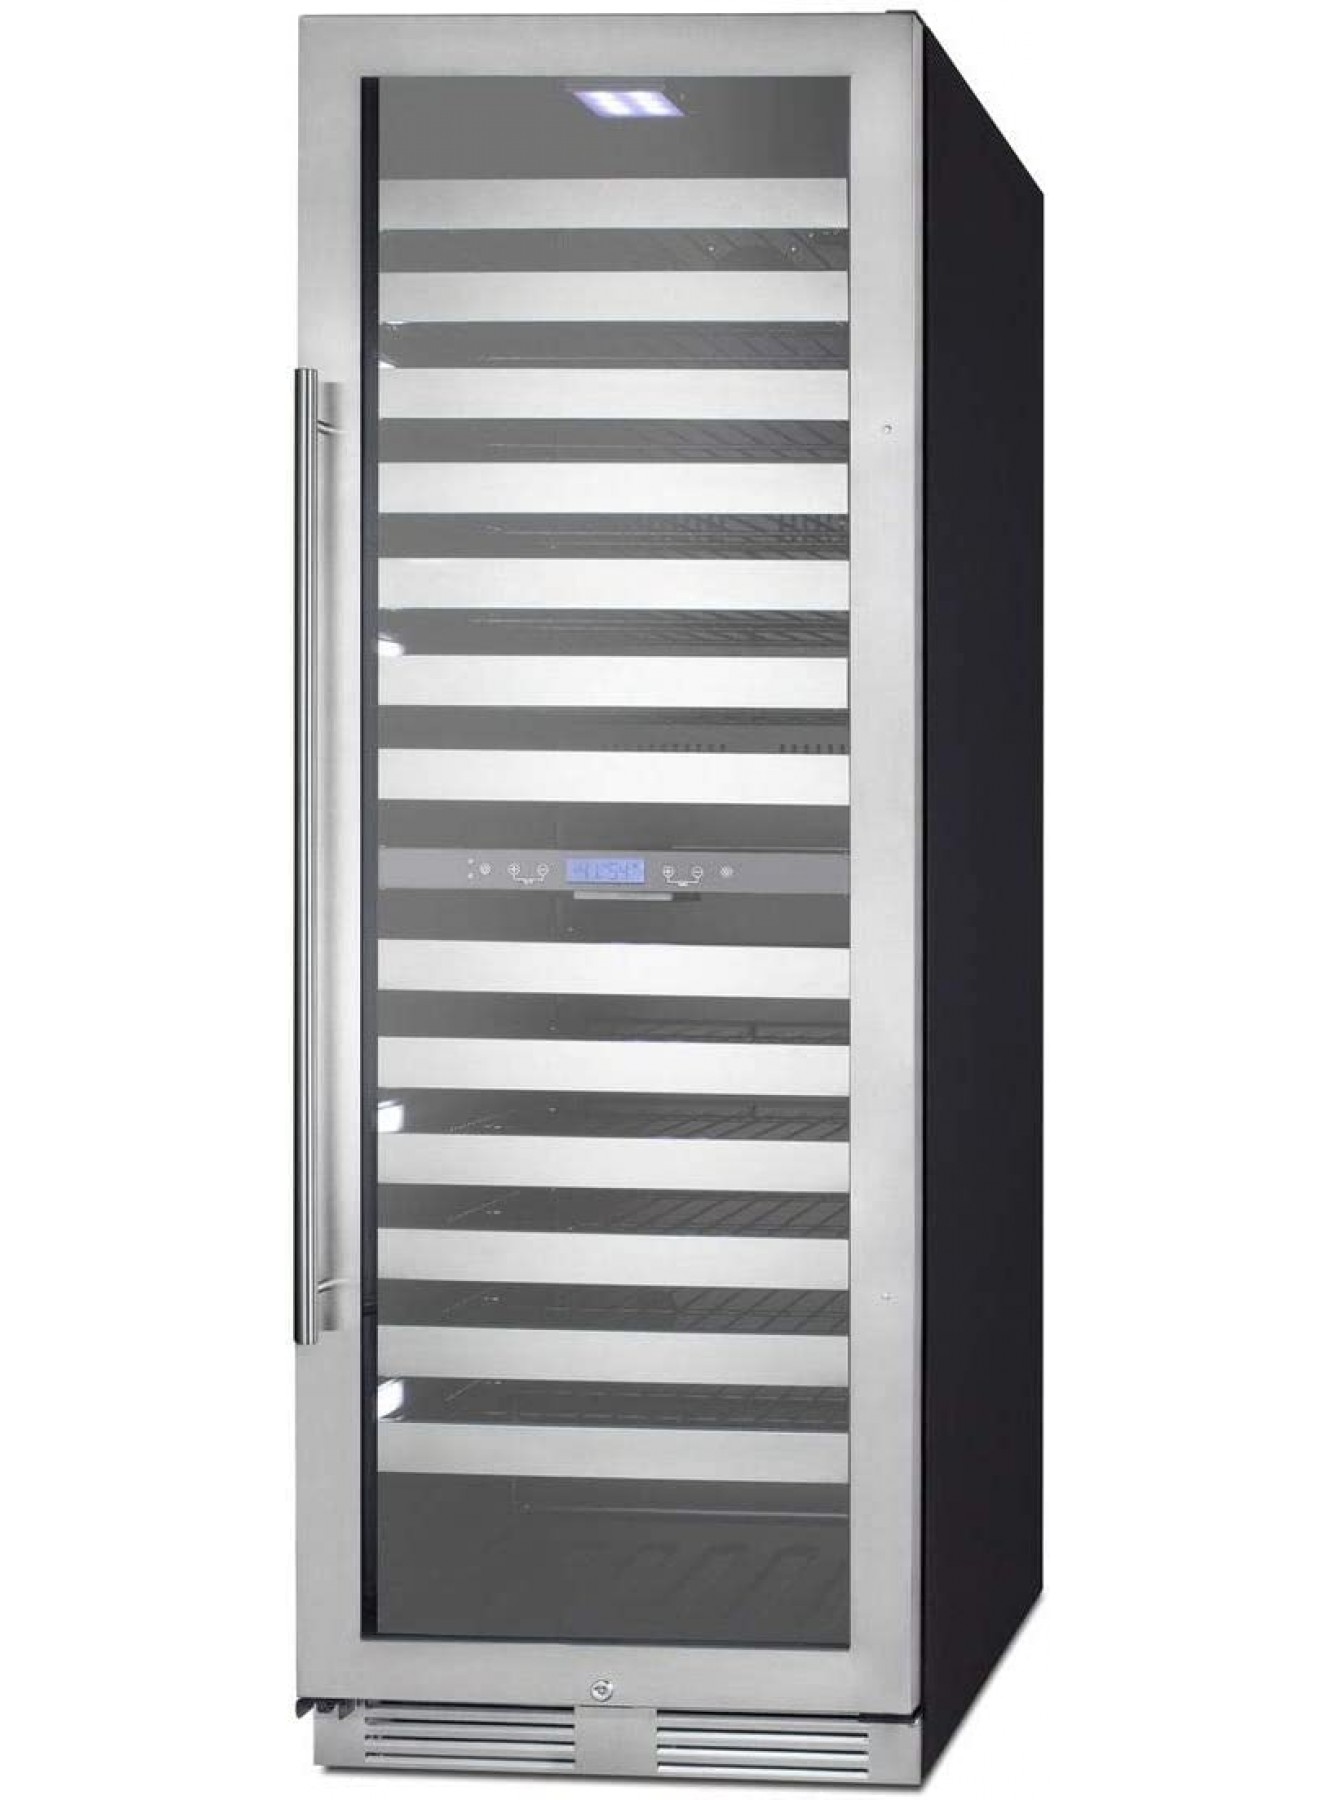 Summit Appliance SWCP2163 24 Wide Dual Zone Wine Cellar For Built-In or Freestanding Use with Glass Door with Stainless Steel Trim Digital Thermostat Full-Extension Shelving and Factory-Installed Lock B08G1Z15Z1